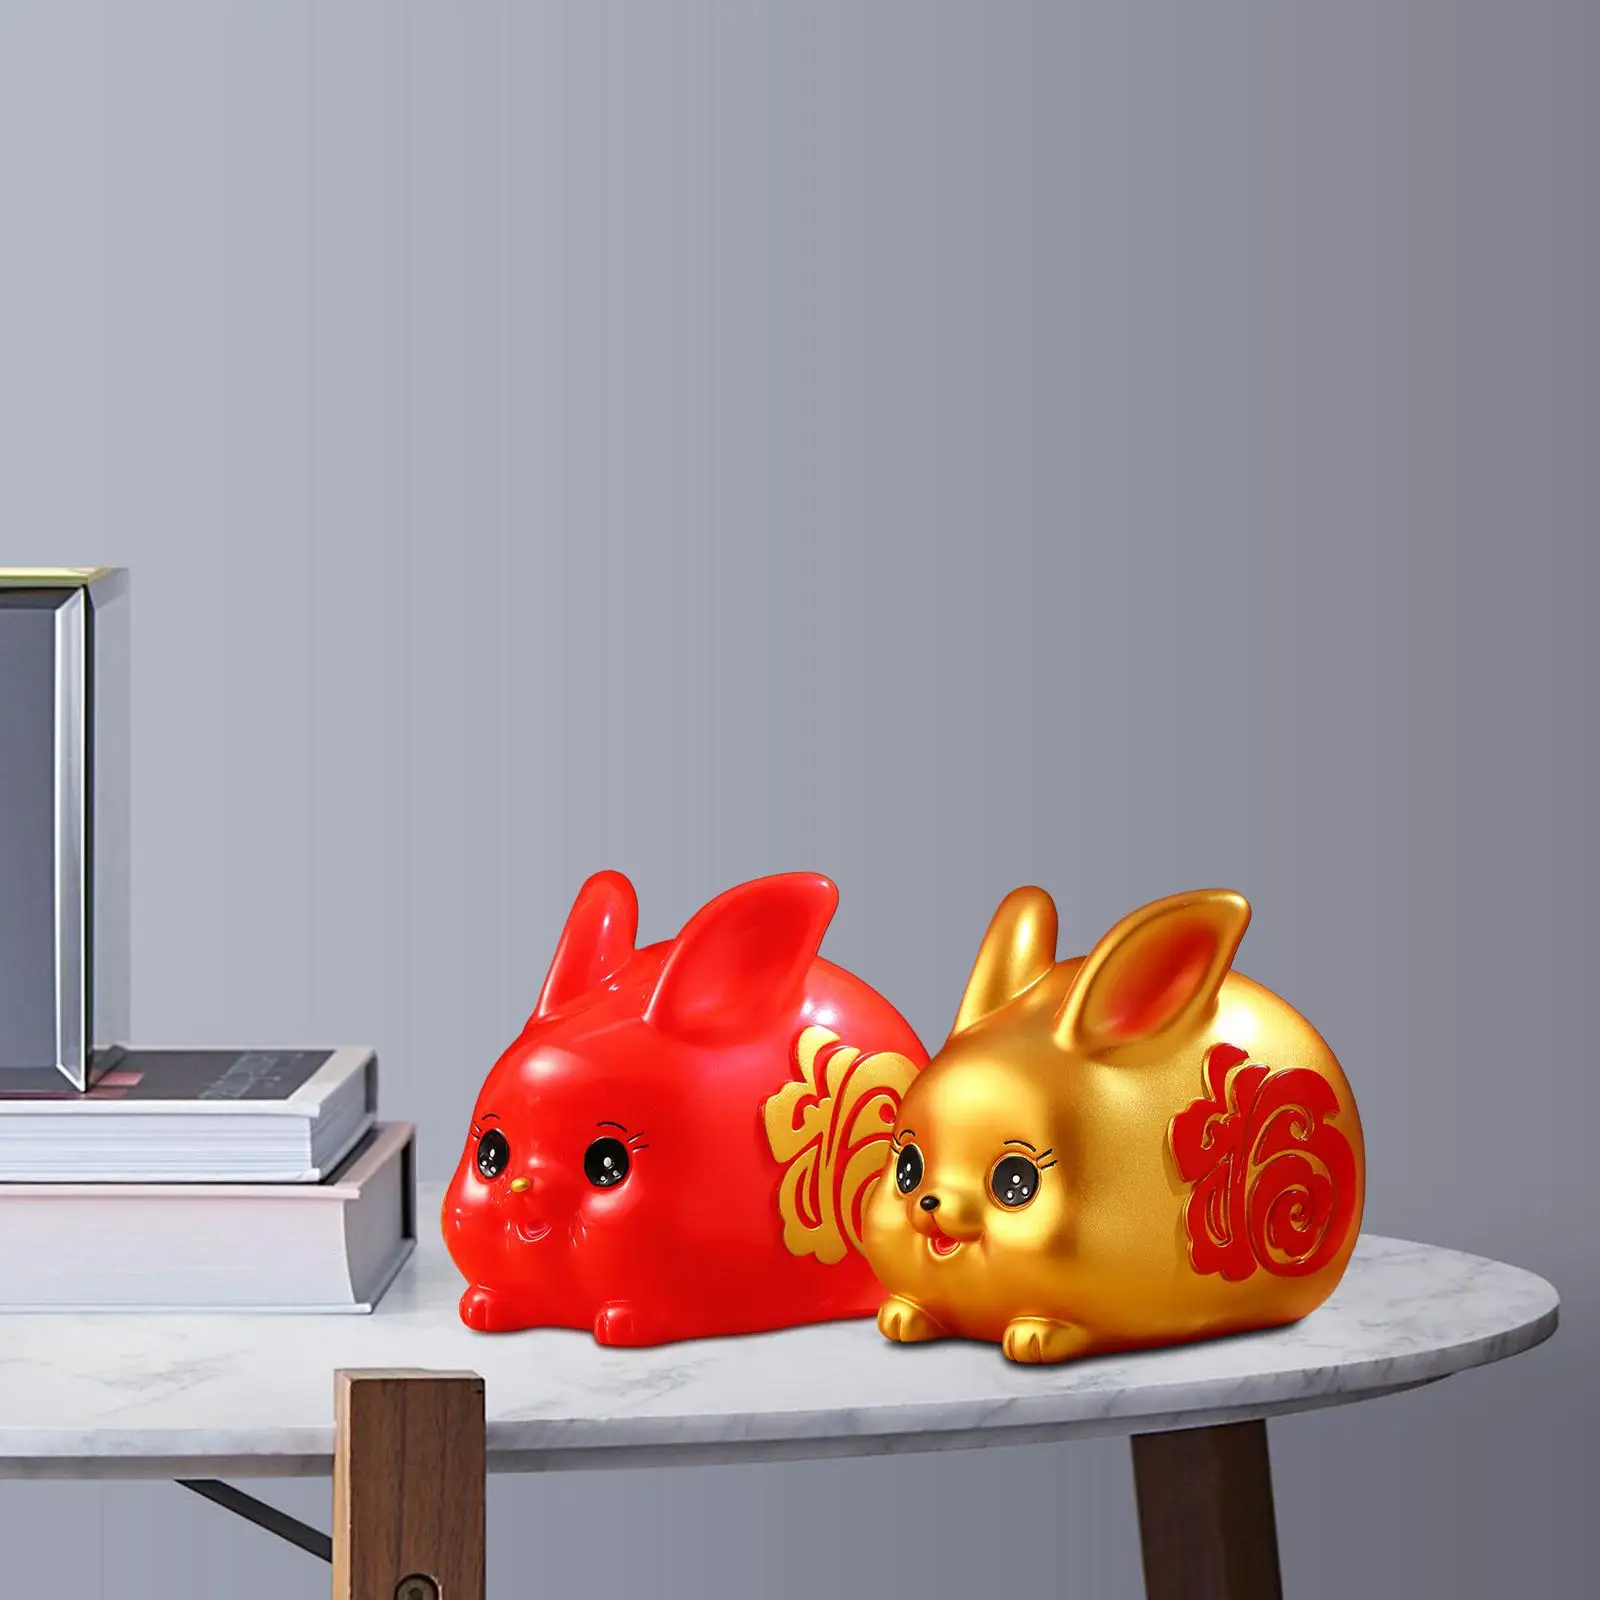 Lucky Rabbit Piggy Bank Animal Figurine Money Box Creative Collection Ornaments Craft for Tabletop Office Home Decor Kids Girls